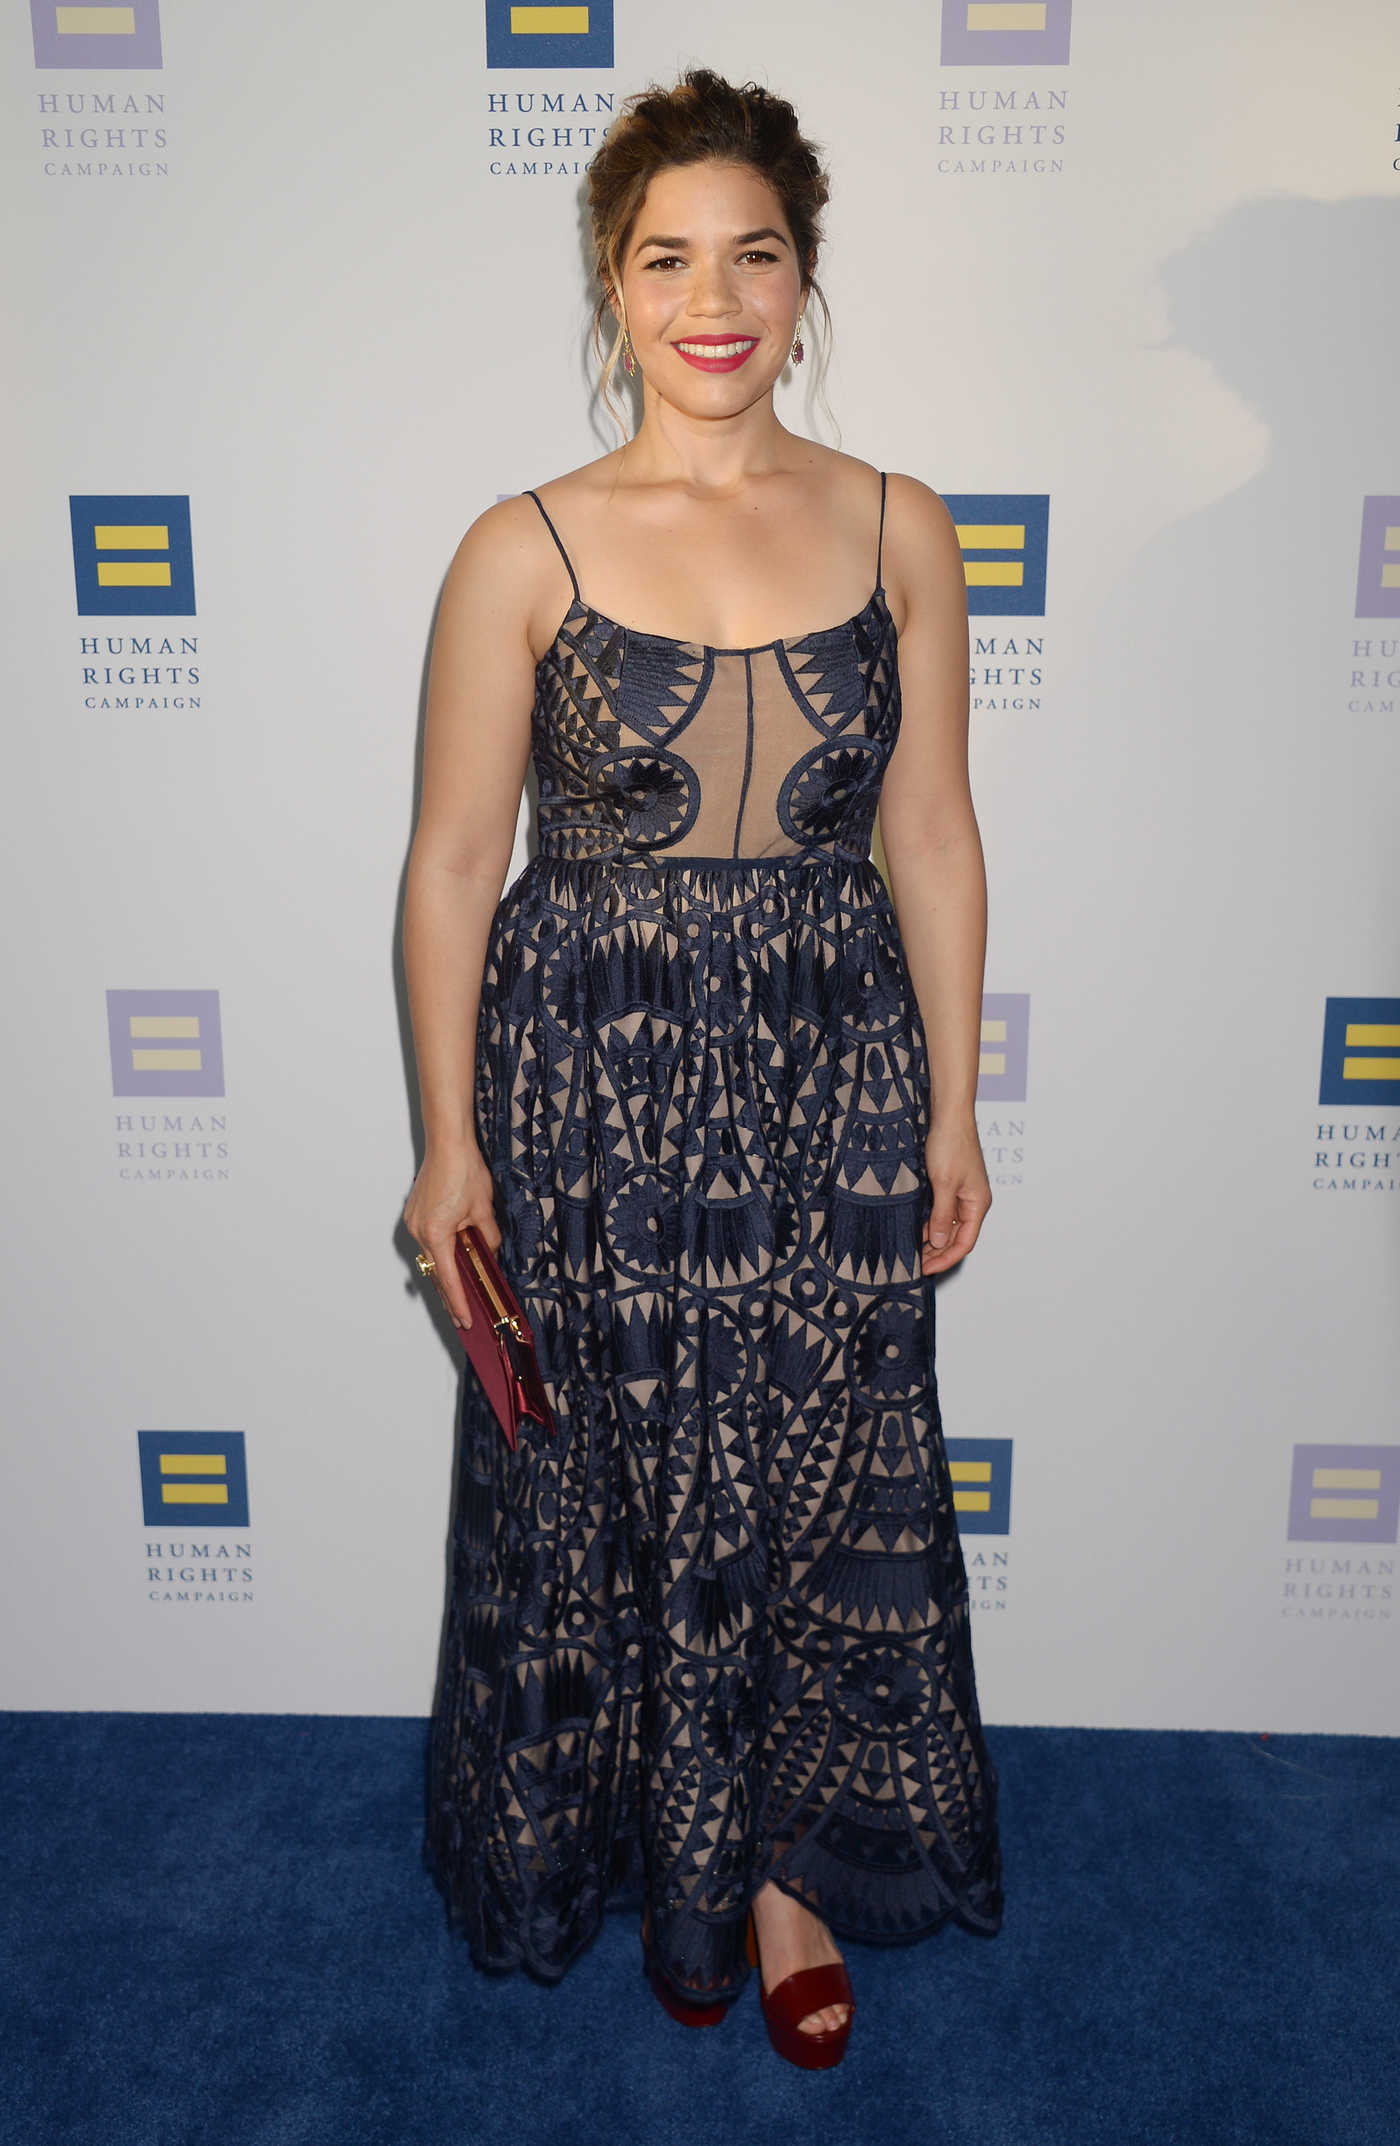 America Ferrera at the Human Rights Campaign Gala Dinner in Los Angeles 03/18/2017